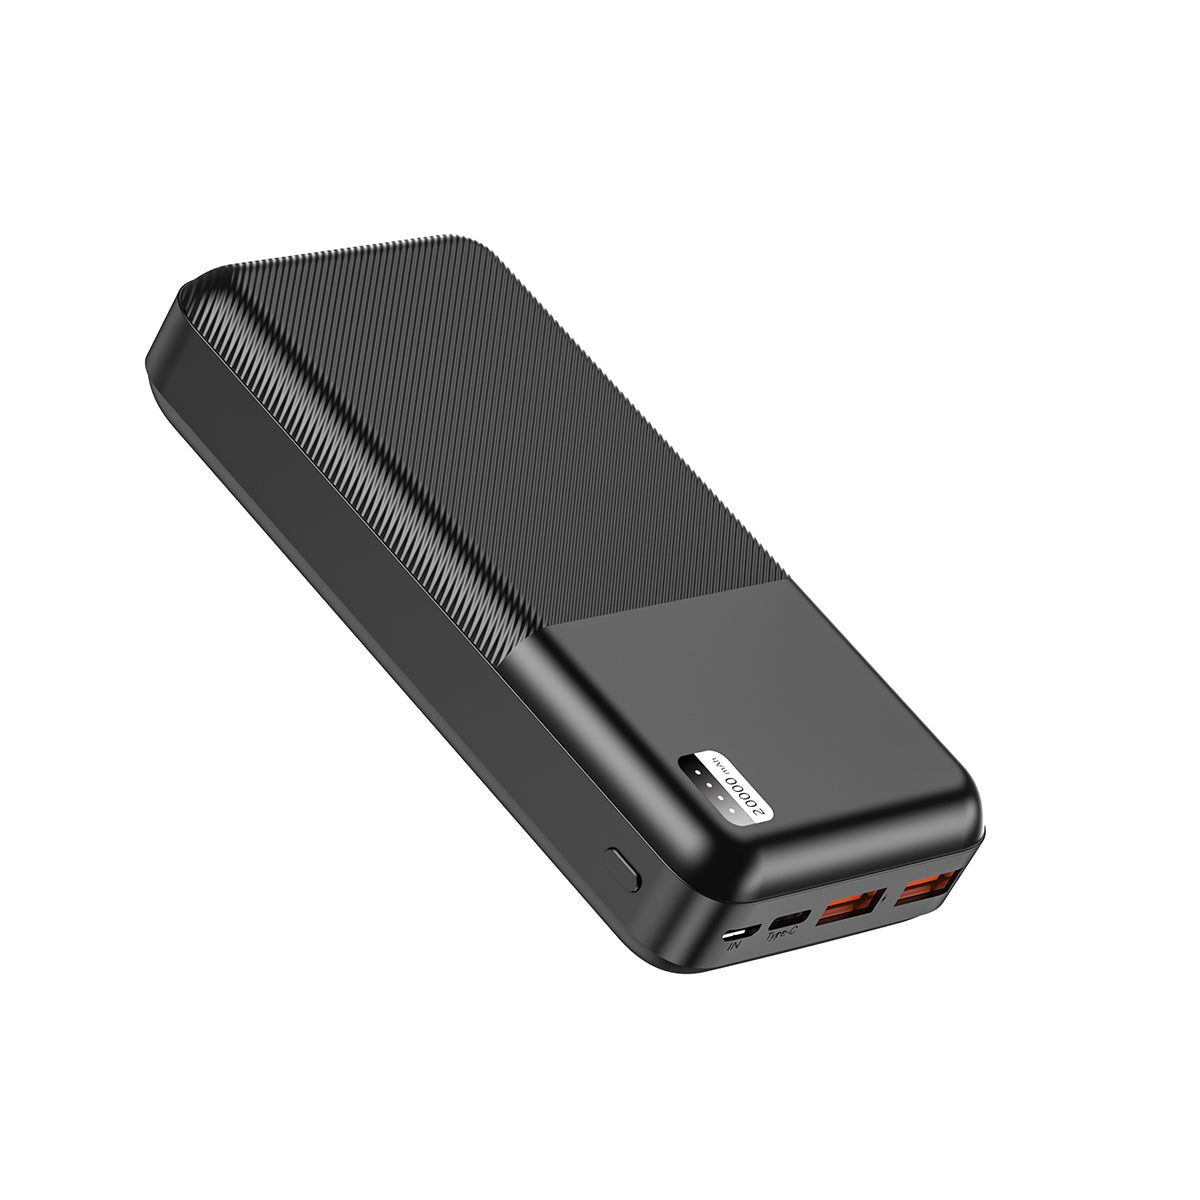 Xipin PX722 Dual USB Portable Powerbank 20000mAh with Quick Charge LED Light Indicator